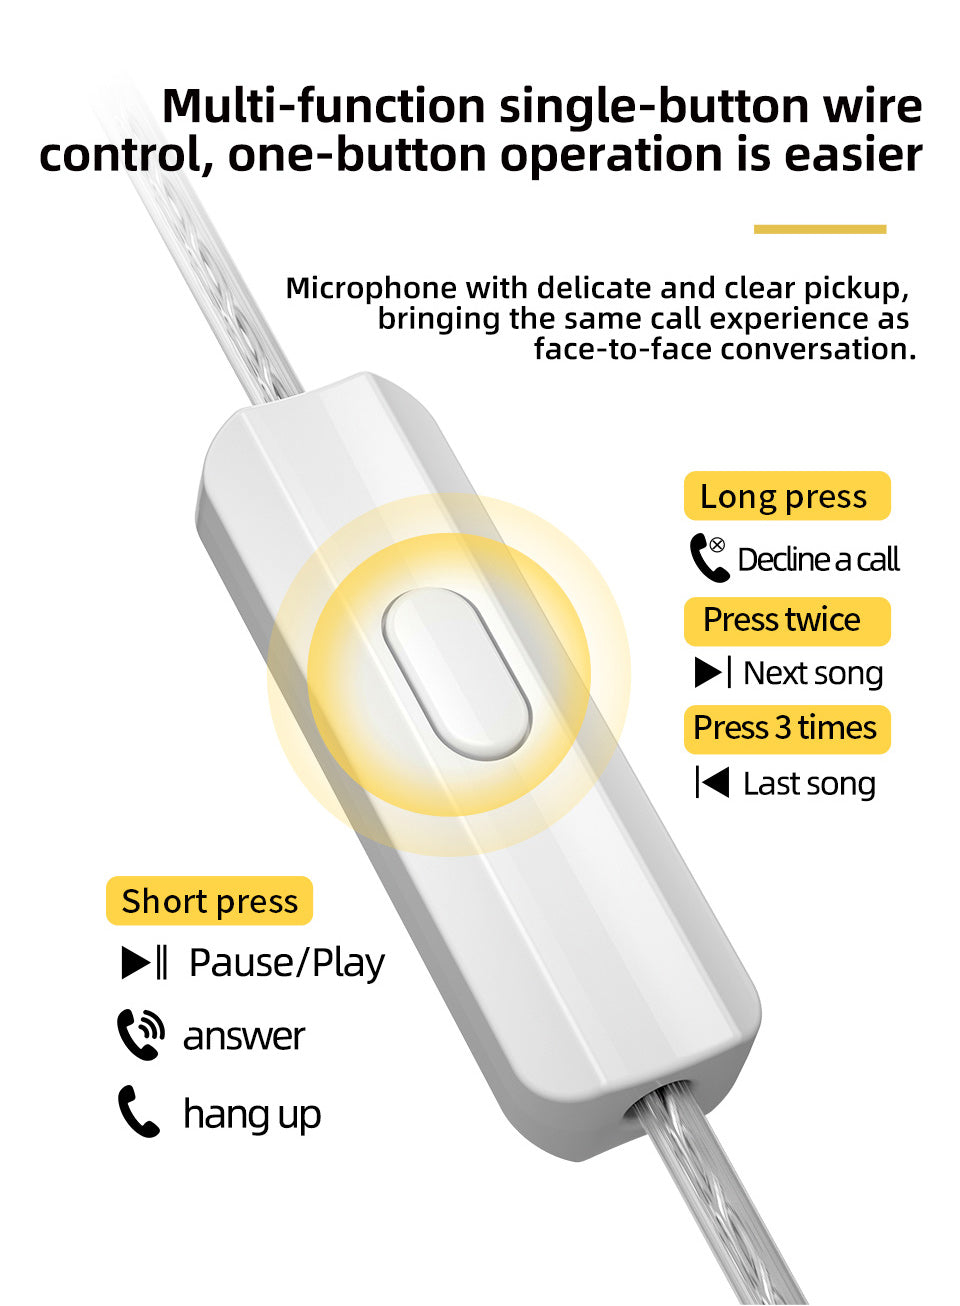 Microphone with delicate and clear pickup, bringing the same call experience as face-to-face conversation.